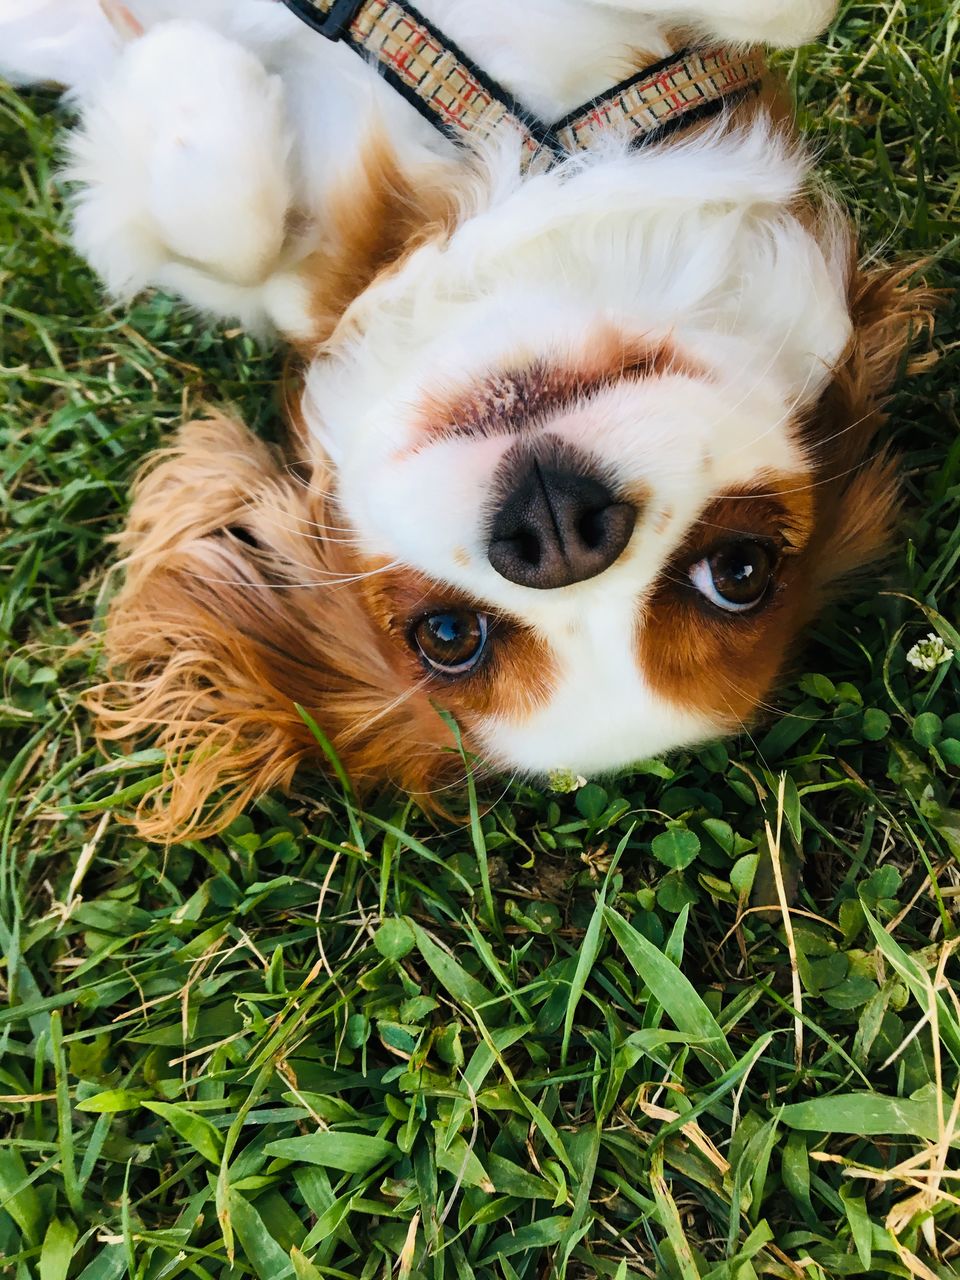 HIGH ANGLE PORTRAIT OF DOG IN GRASS